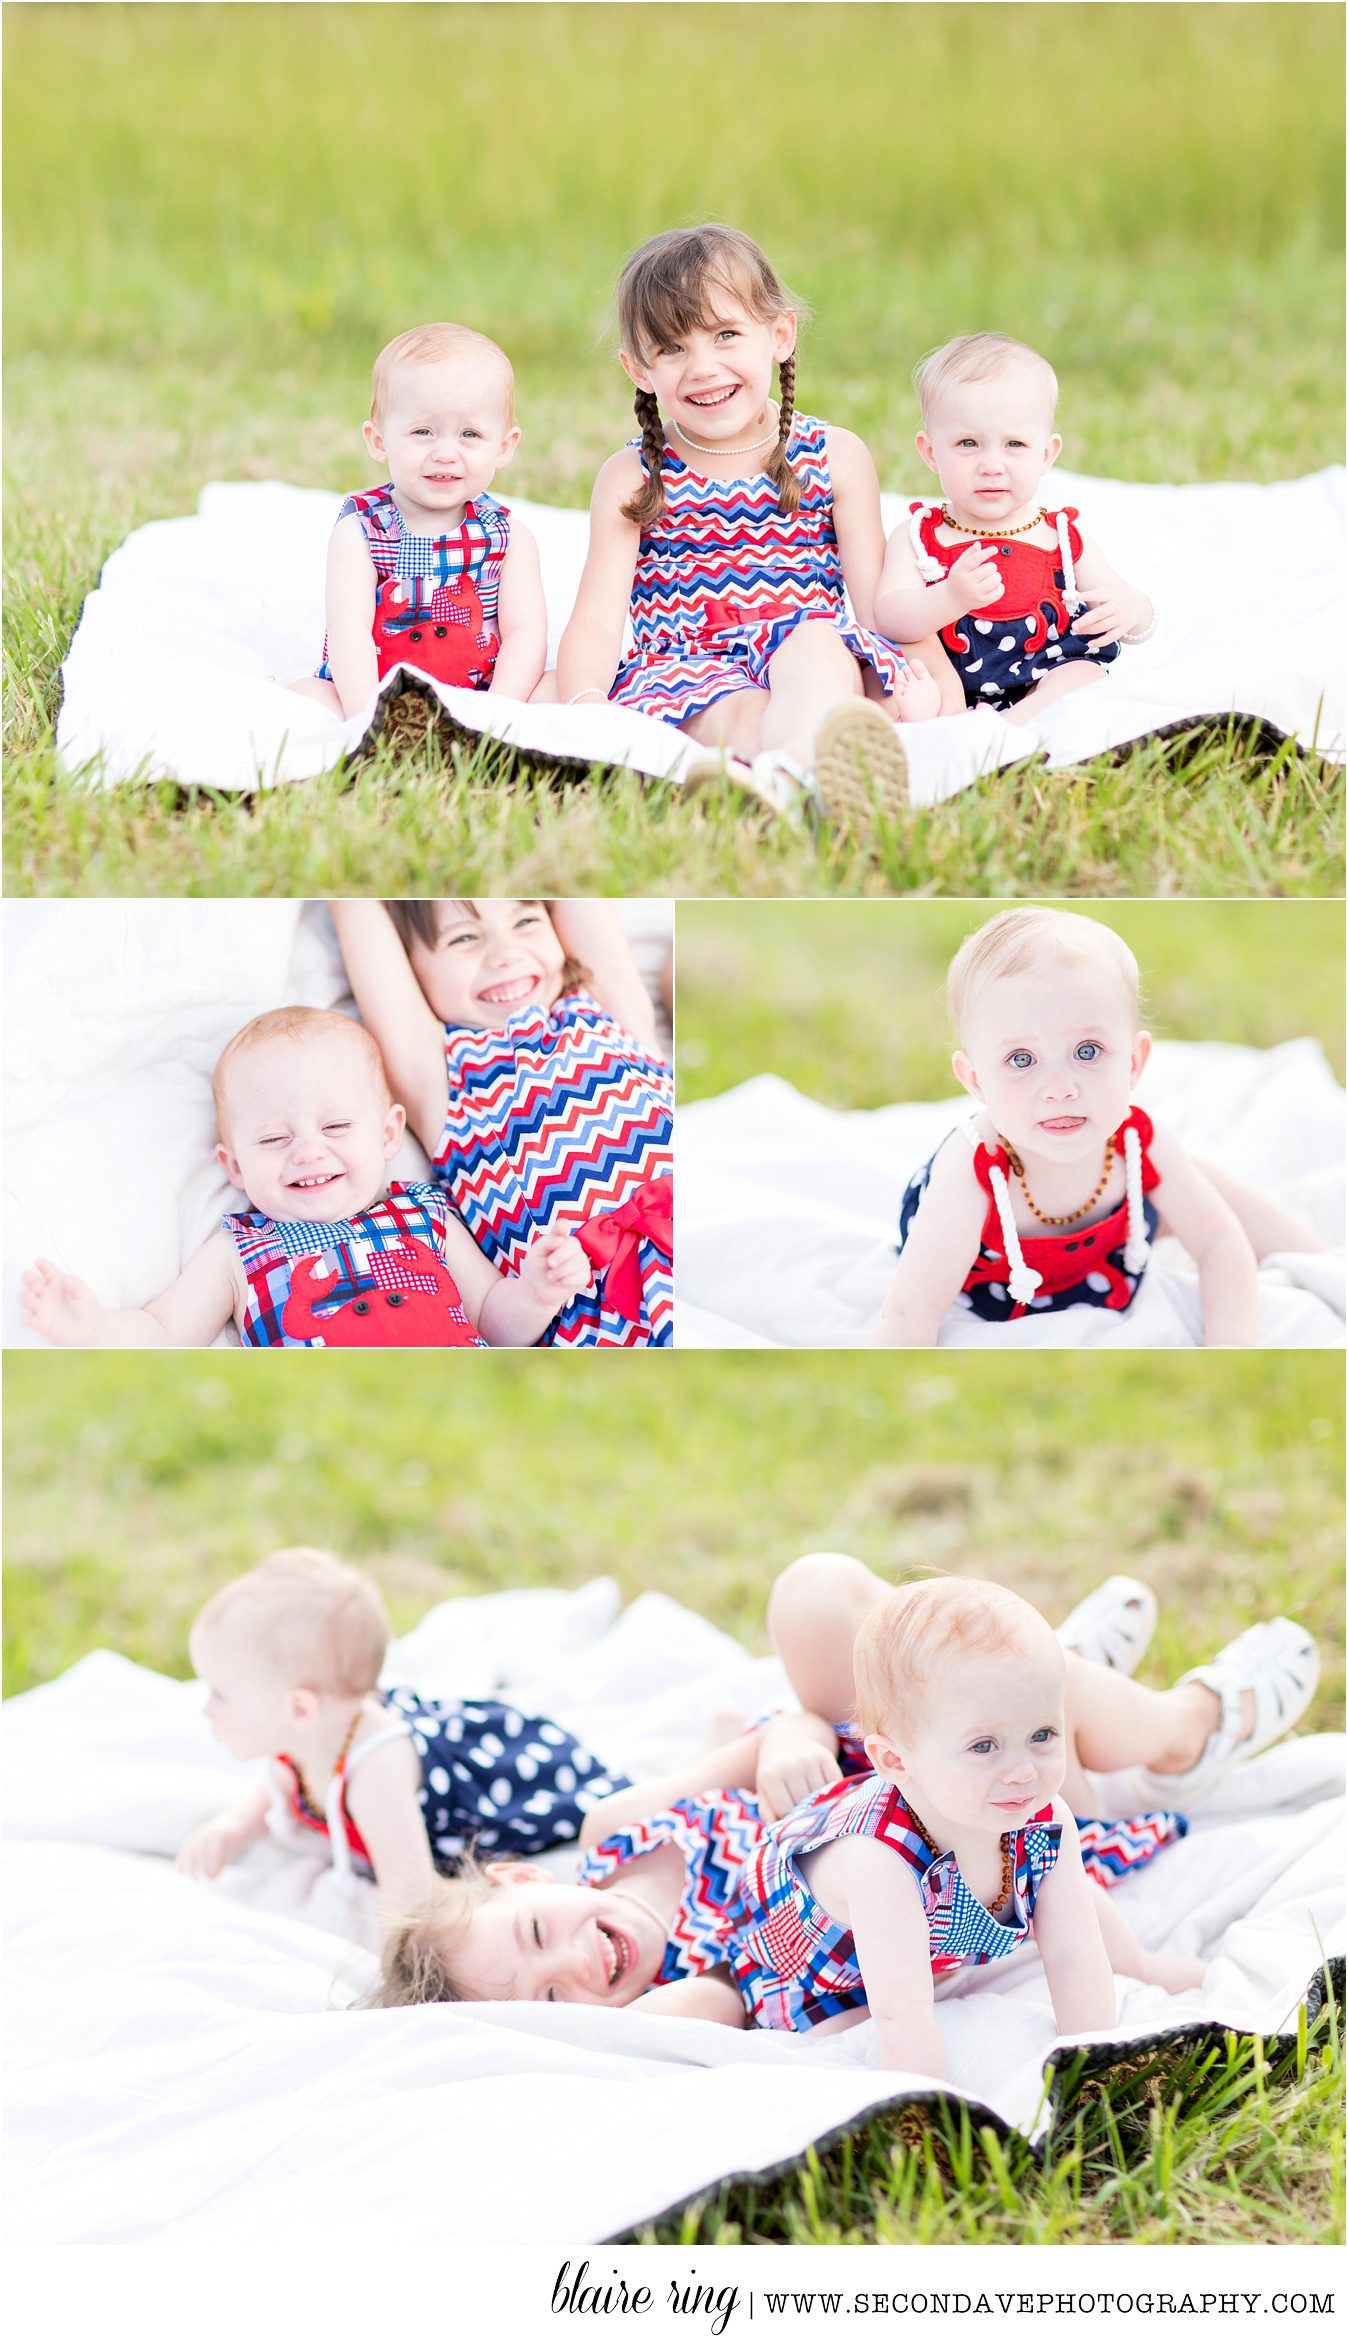 Beautiful 'golden hour' photography session at Morven Park by family photographer in Leesburg VA featuring a big sister and her twin siblings.